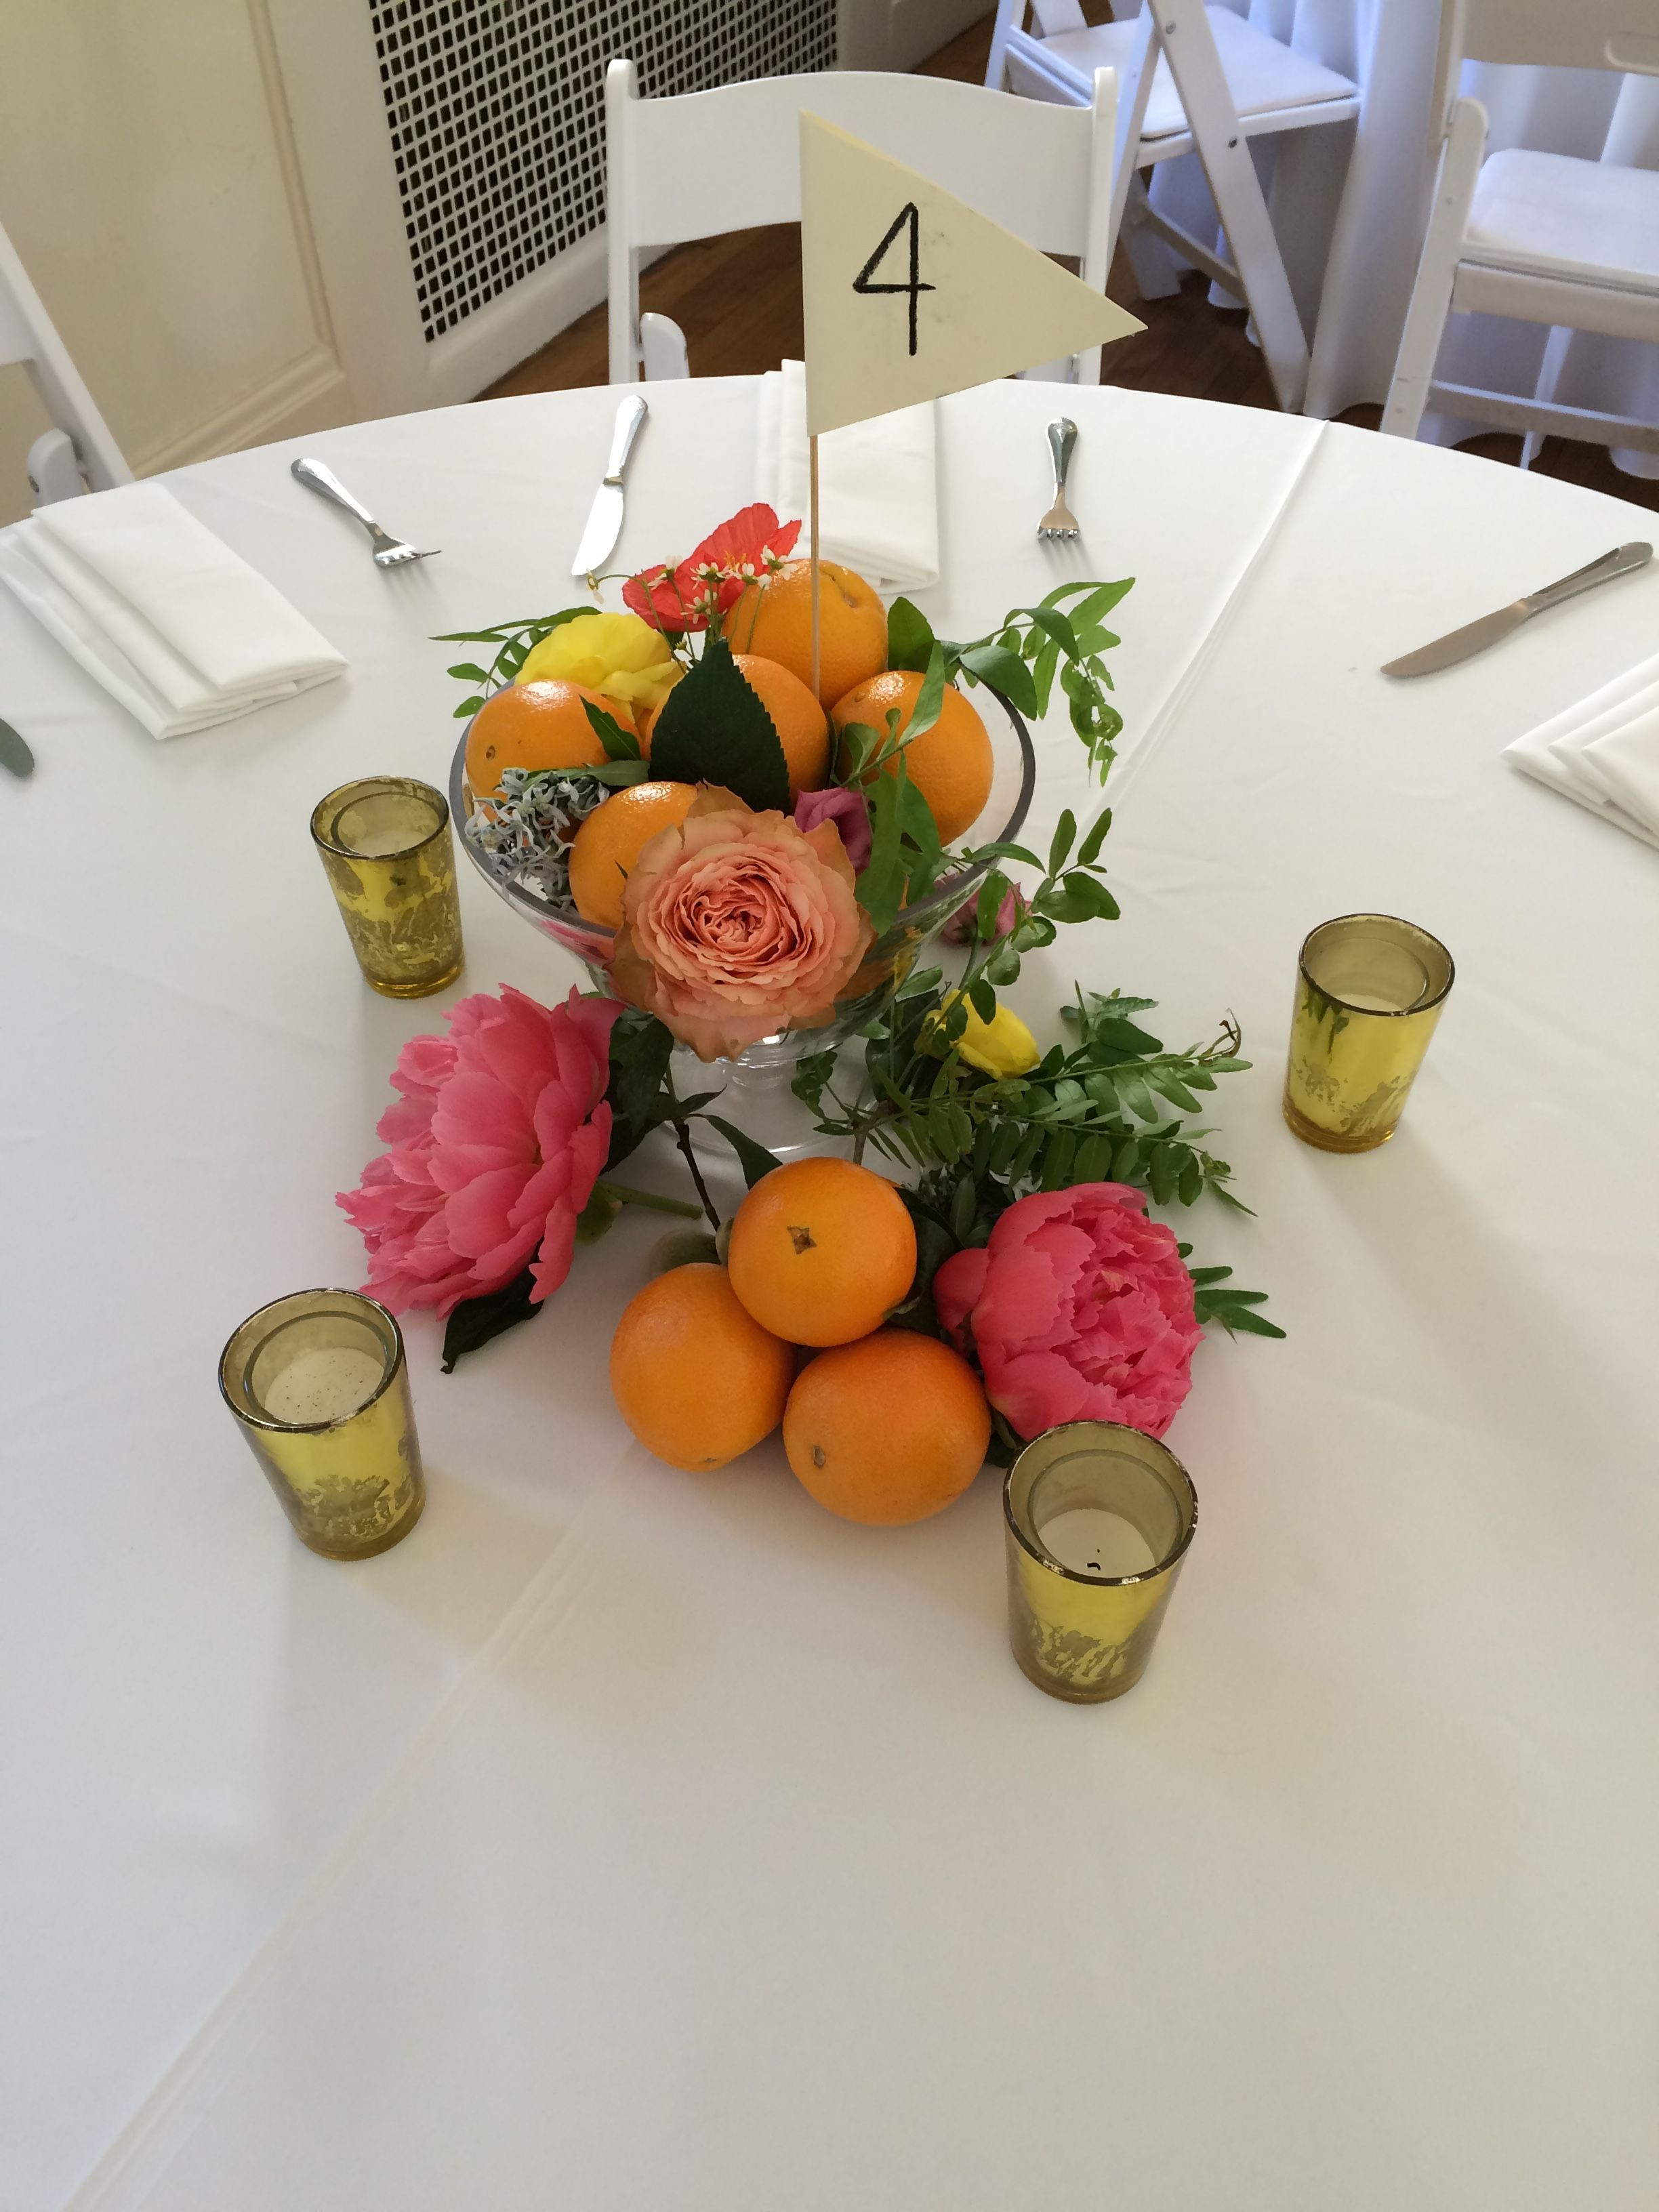 24 Awesome Fruit Vase Centerpiece 2024 free download fruit vase centerpiece of kali and sam may 2016 at colonial dames fruit bowl centerpiece within kali and sam may 2016 at colonial dames fruit bowl centerpiece